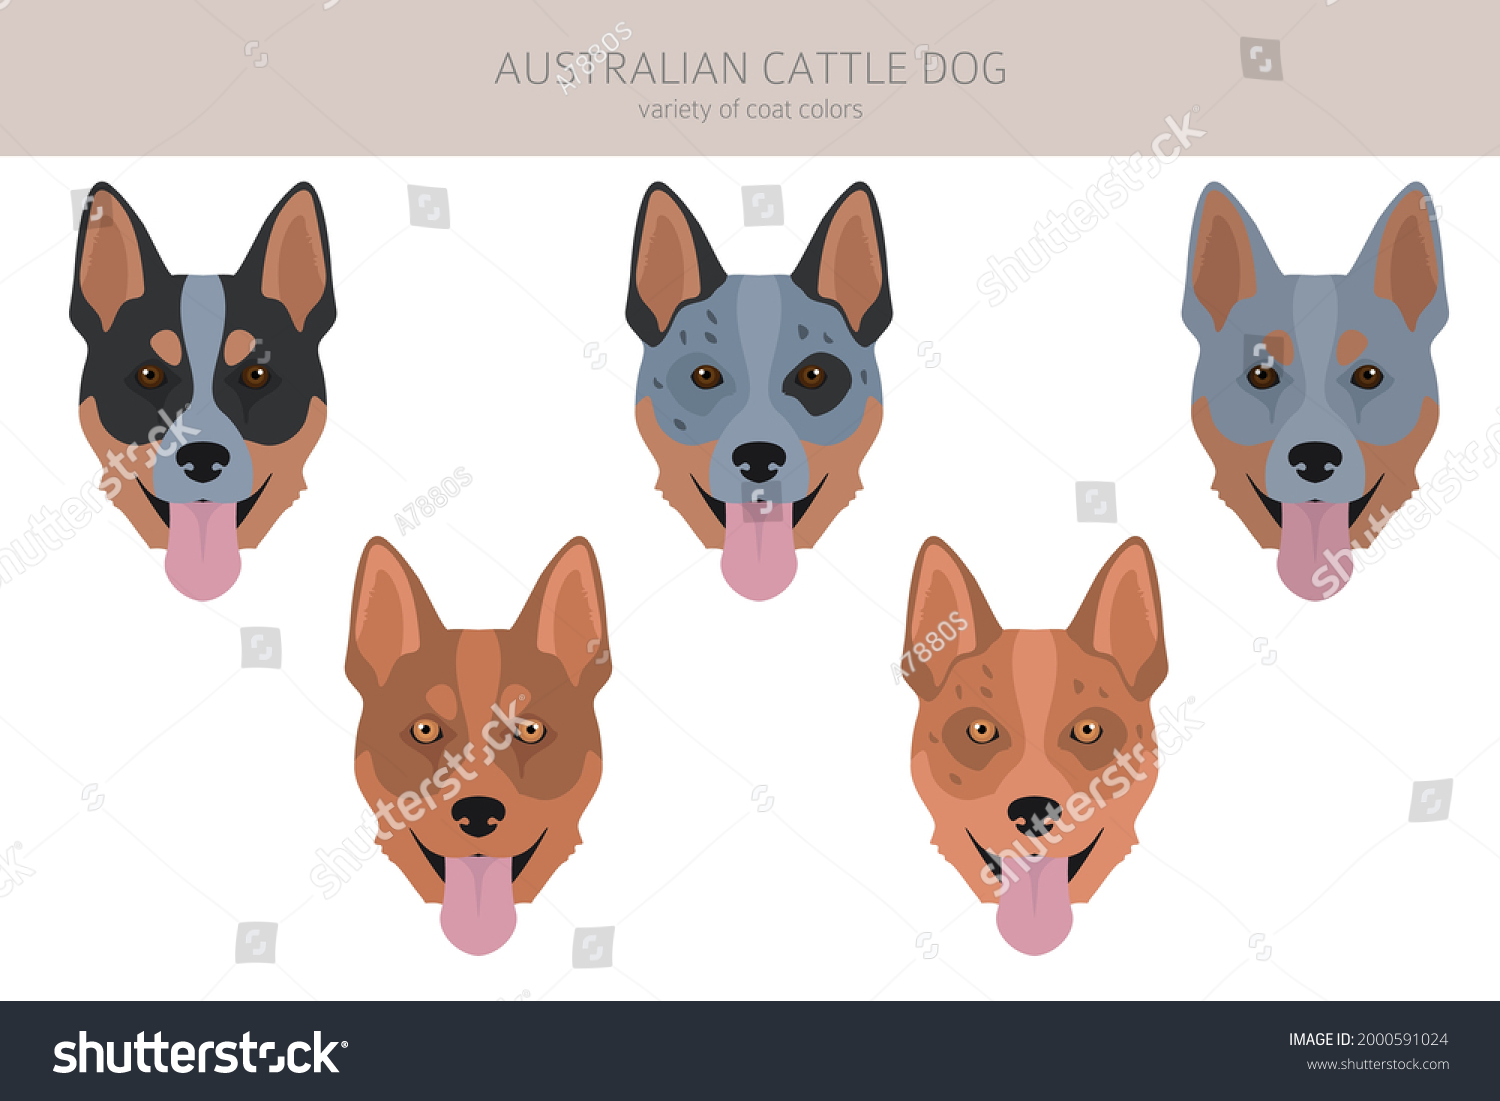 SVG of Australian cattle dog all colours clipart. Different coat colors and poses set.  Vector illustration svg